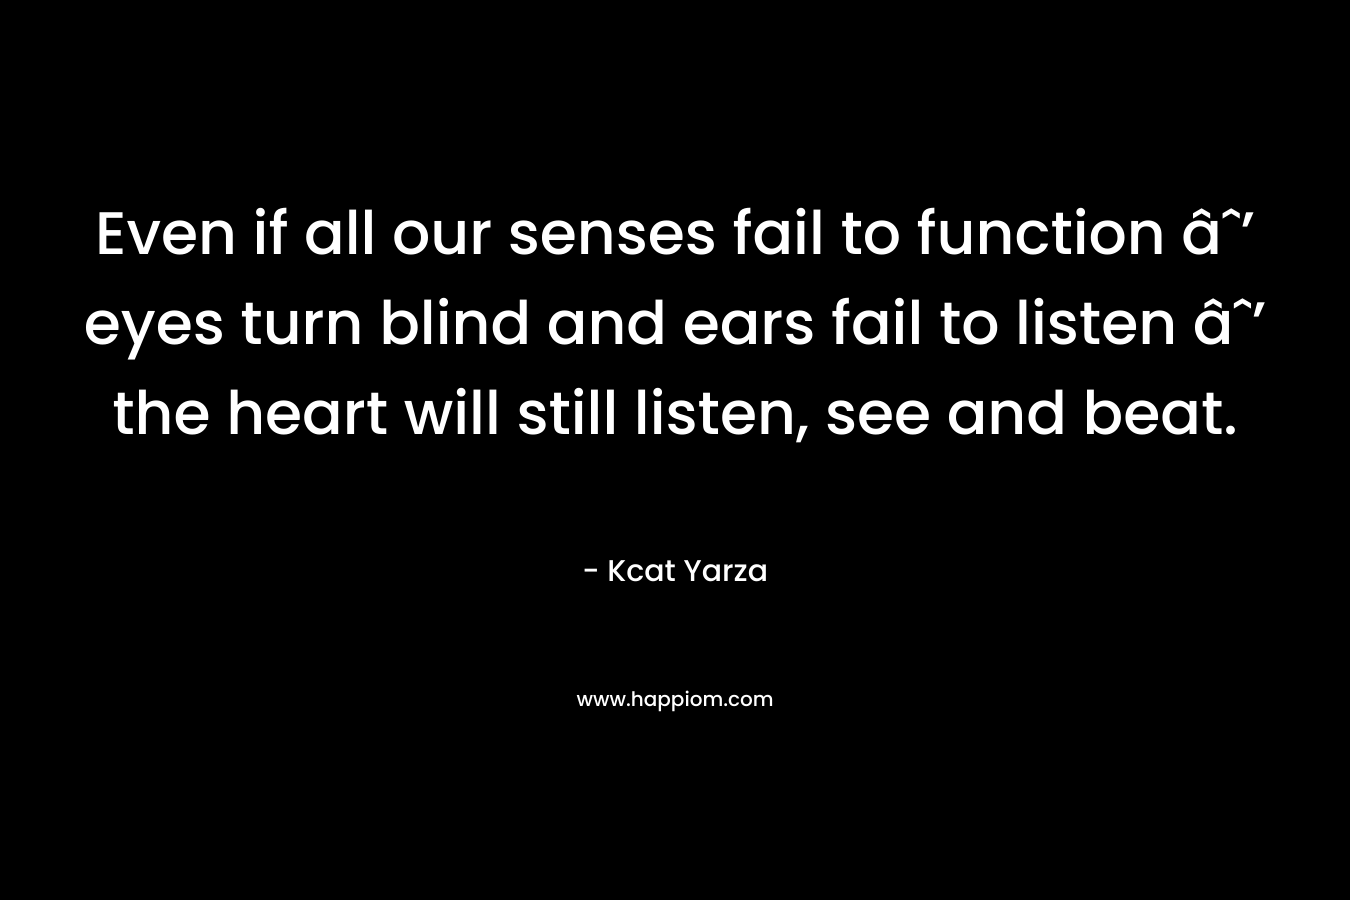 Even if all our senses fail to function âˆ’ eyes turn blind and ears fail to listen âˆ’ the heart will still listen, see and beat.